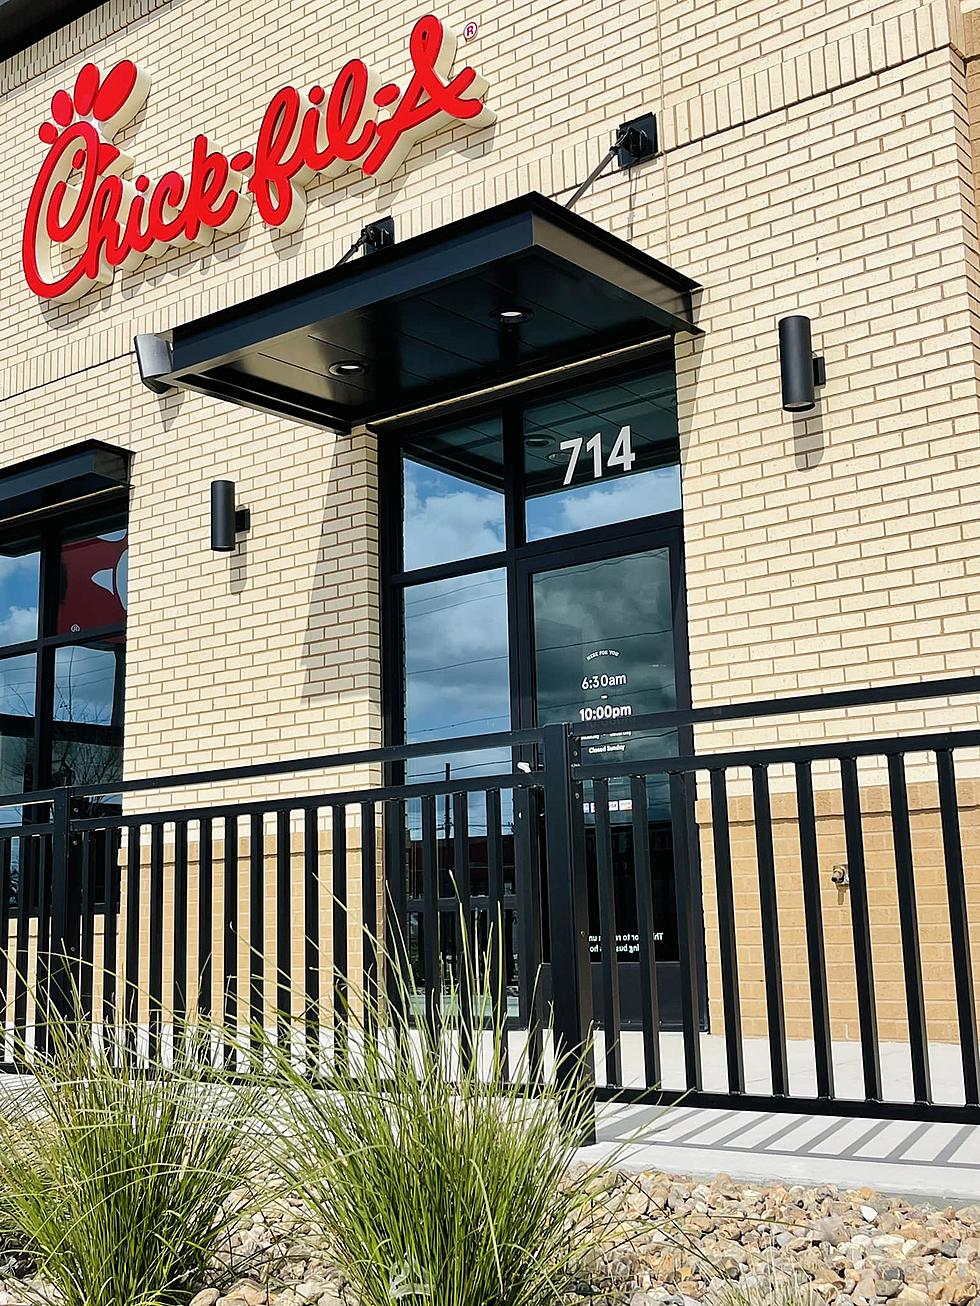 Victoria Chick-fil-A Through the Years – Opening Date Announced